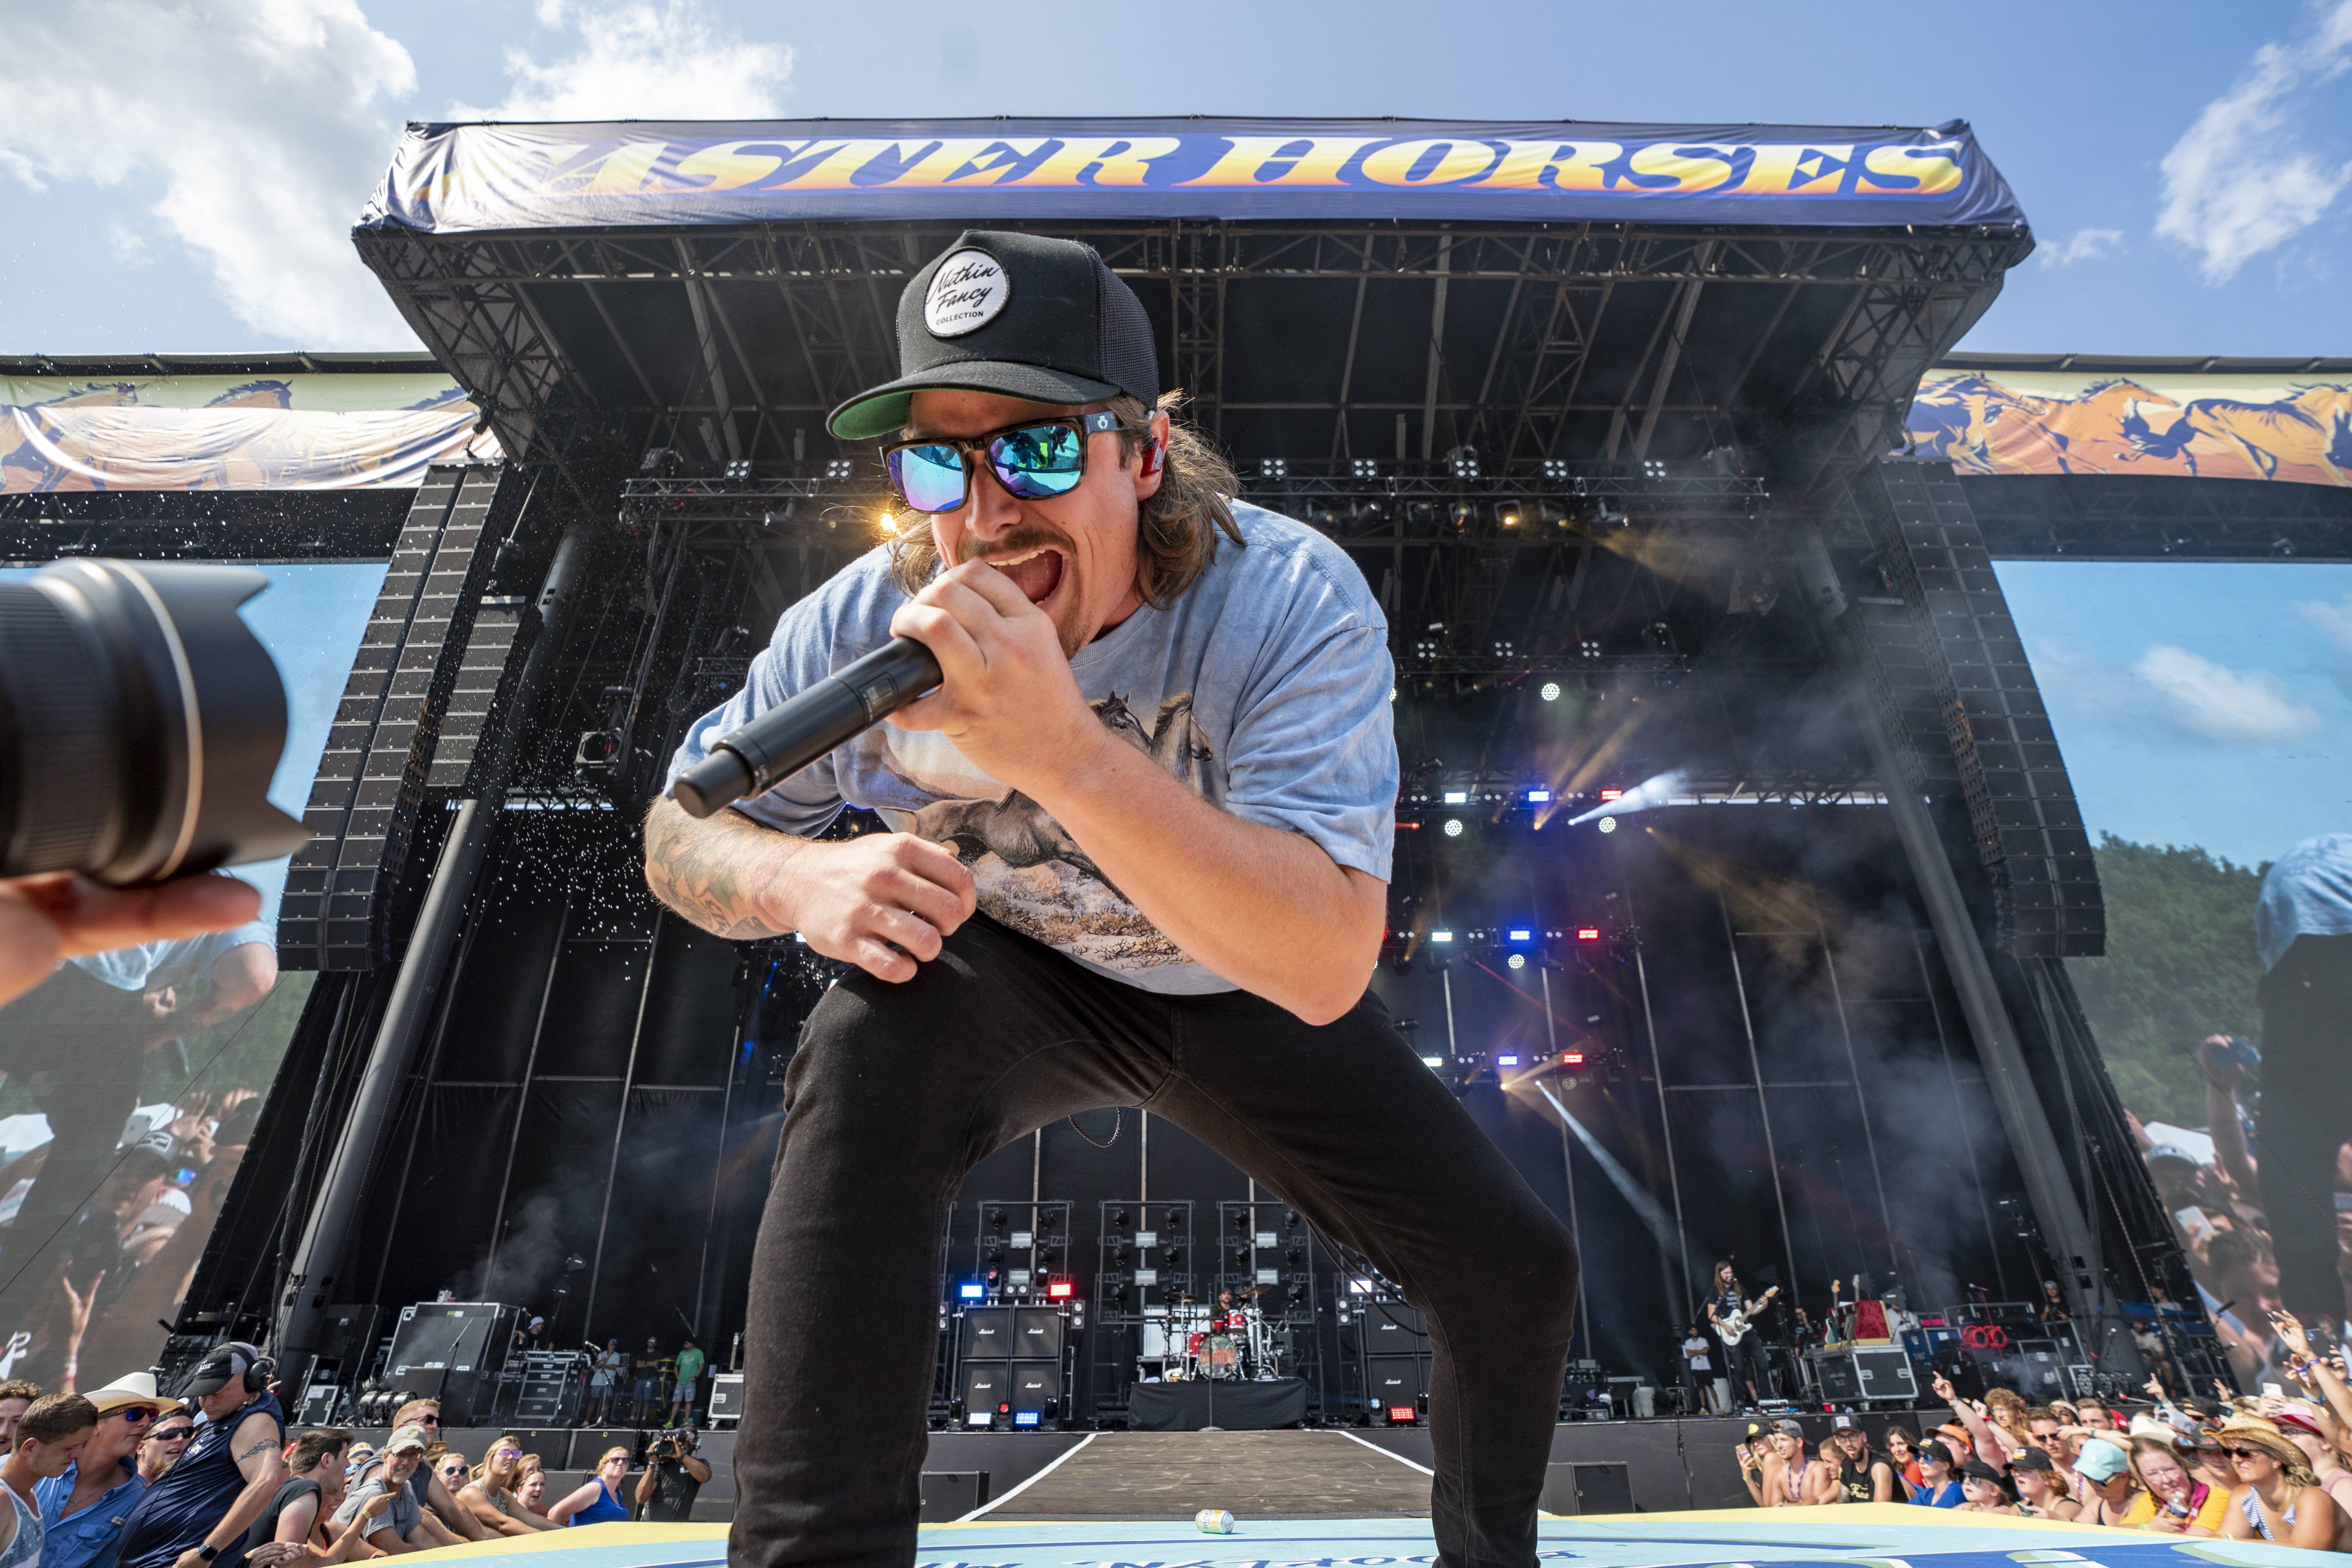 BROOKLYN, MICHIGAN - JULY 17: HARDY performs during Faster Horses Festival at Michigan International Speedway on July 17, 2021 in Brooklyn, Michigan. 